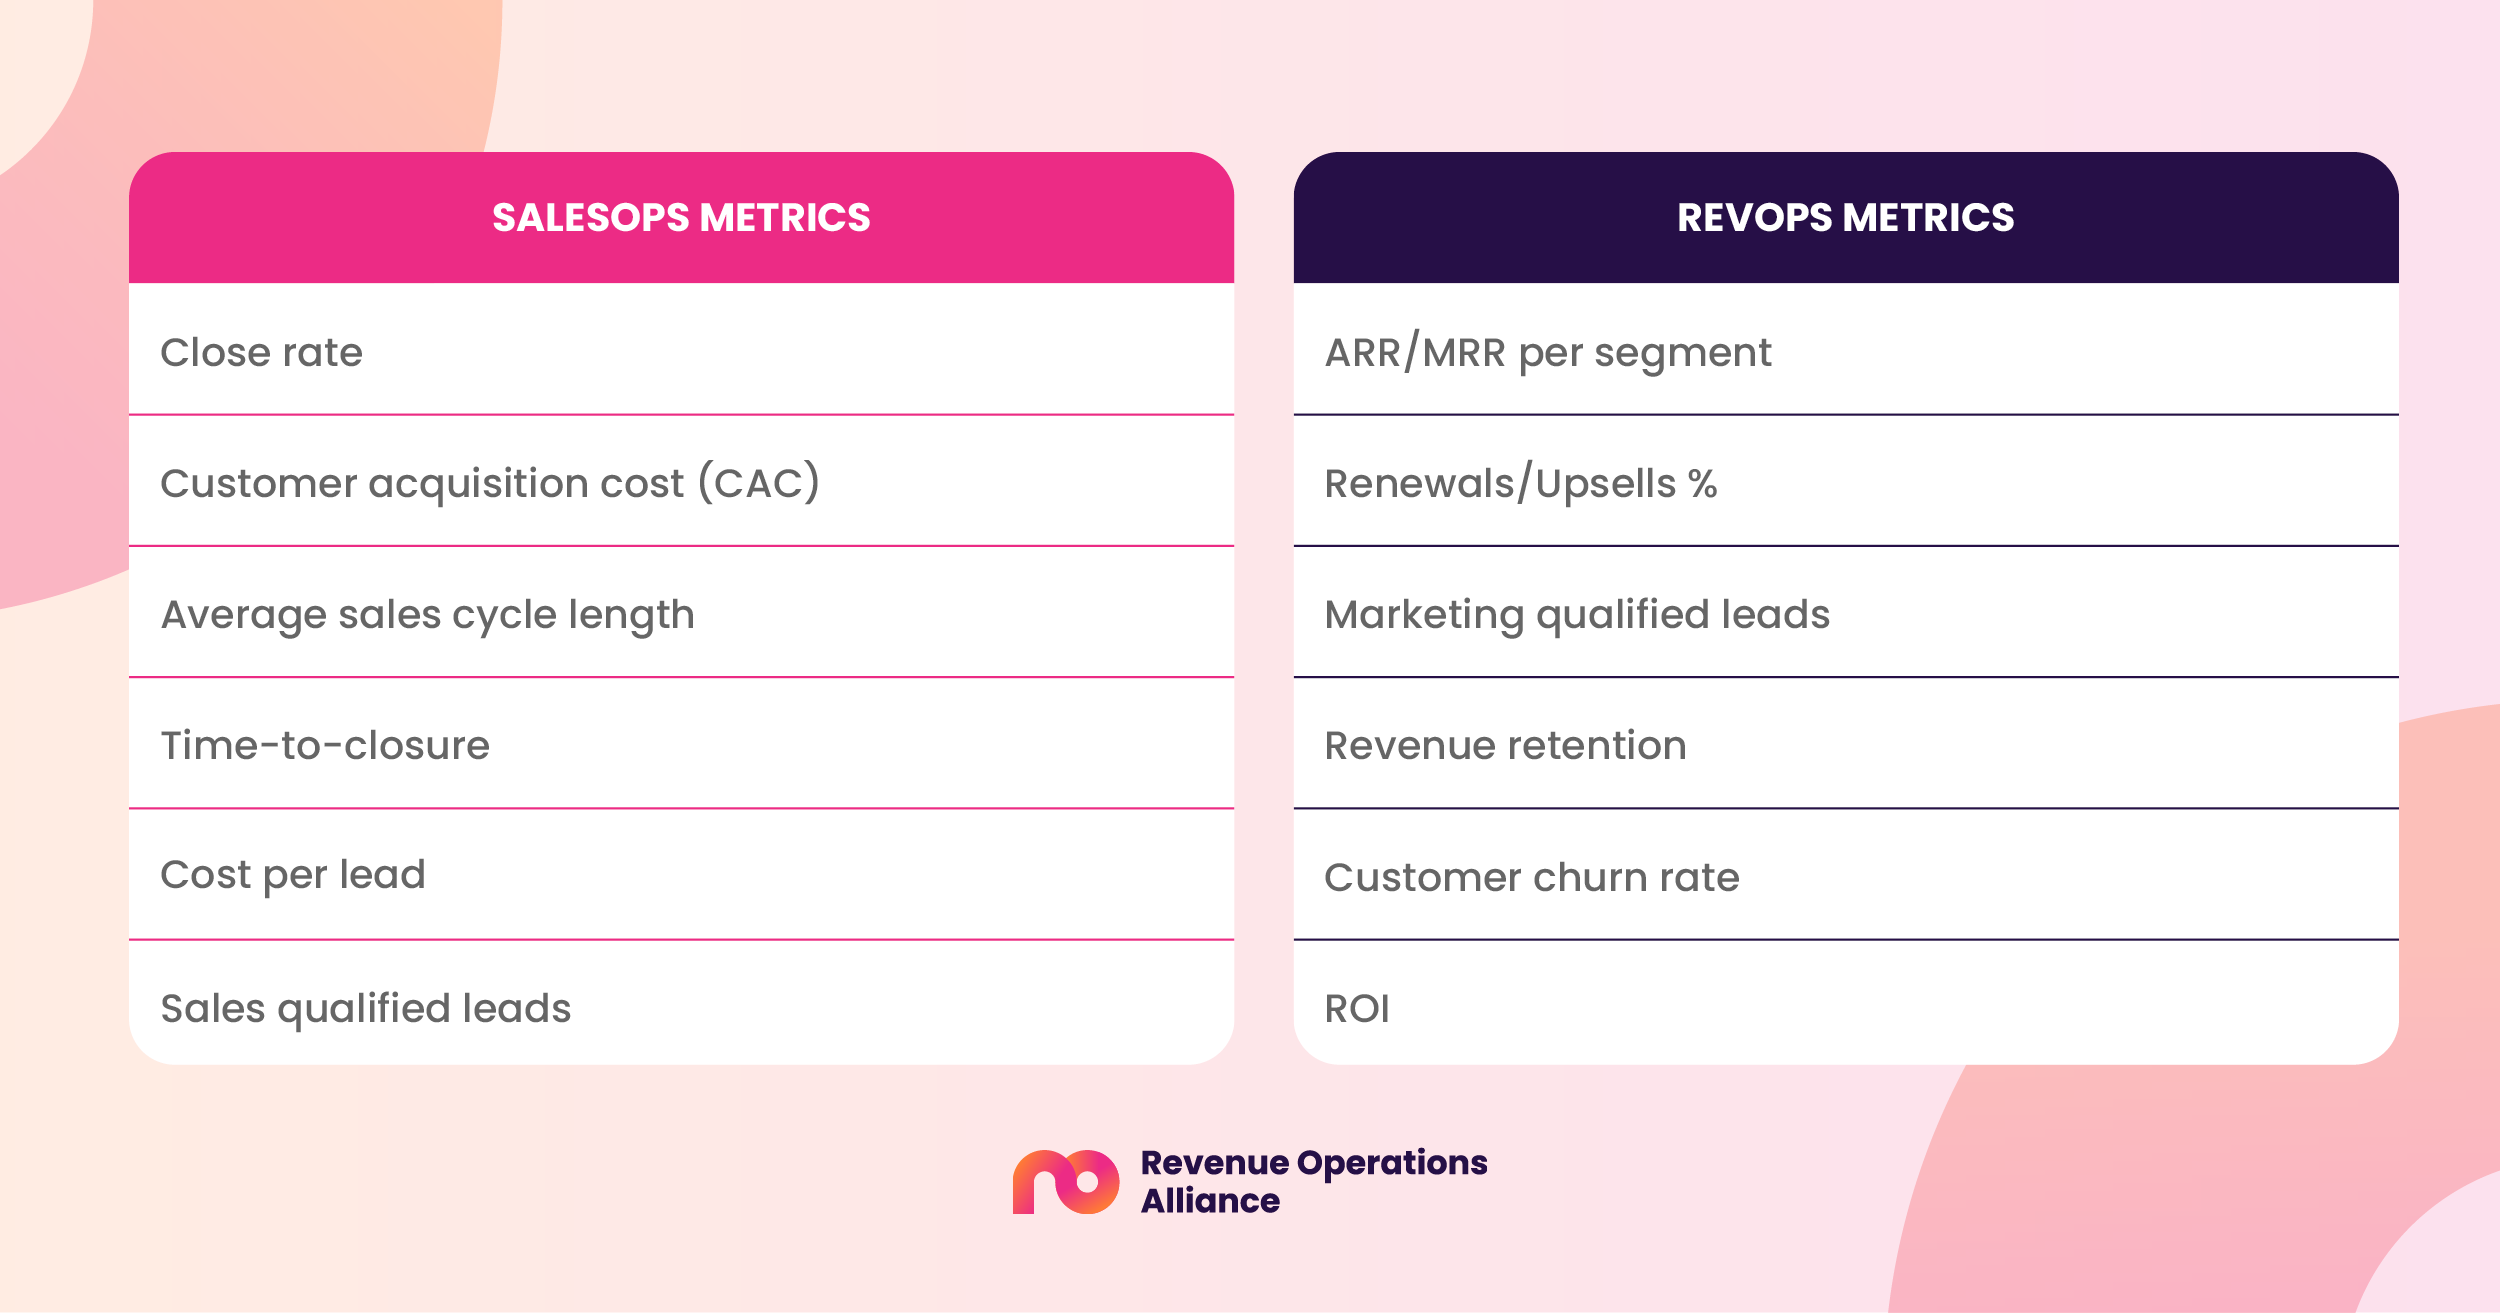 Left column: SalesOps metrics: Close rate, Customer acquisition cost (CAC), Average sales cycle length, Time-to-closure, Cost per lead, Sales qualified leads. Right column: RevOps Metrics: ARR/MRR per segment, Renewals/Upsells %, Marketing qualified leads, Revenue retention, Customer churn rate, ROI